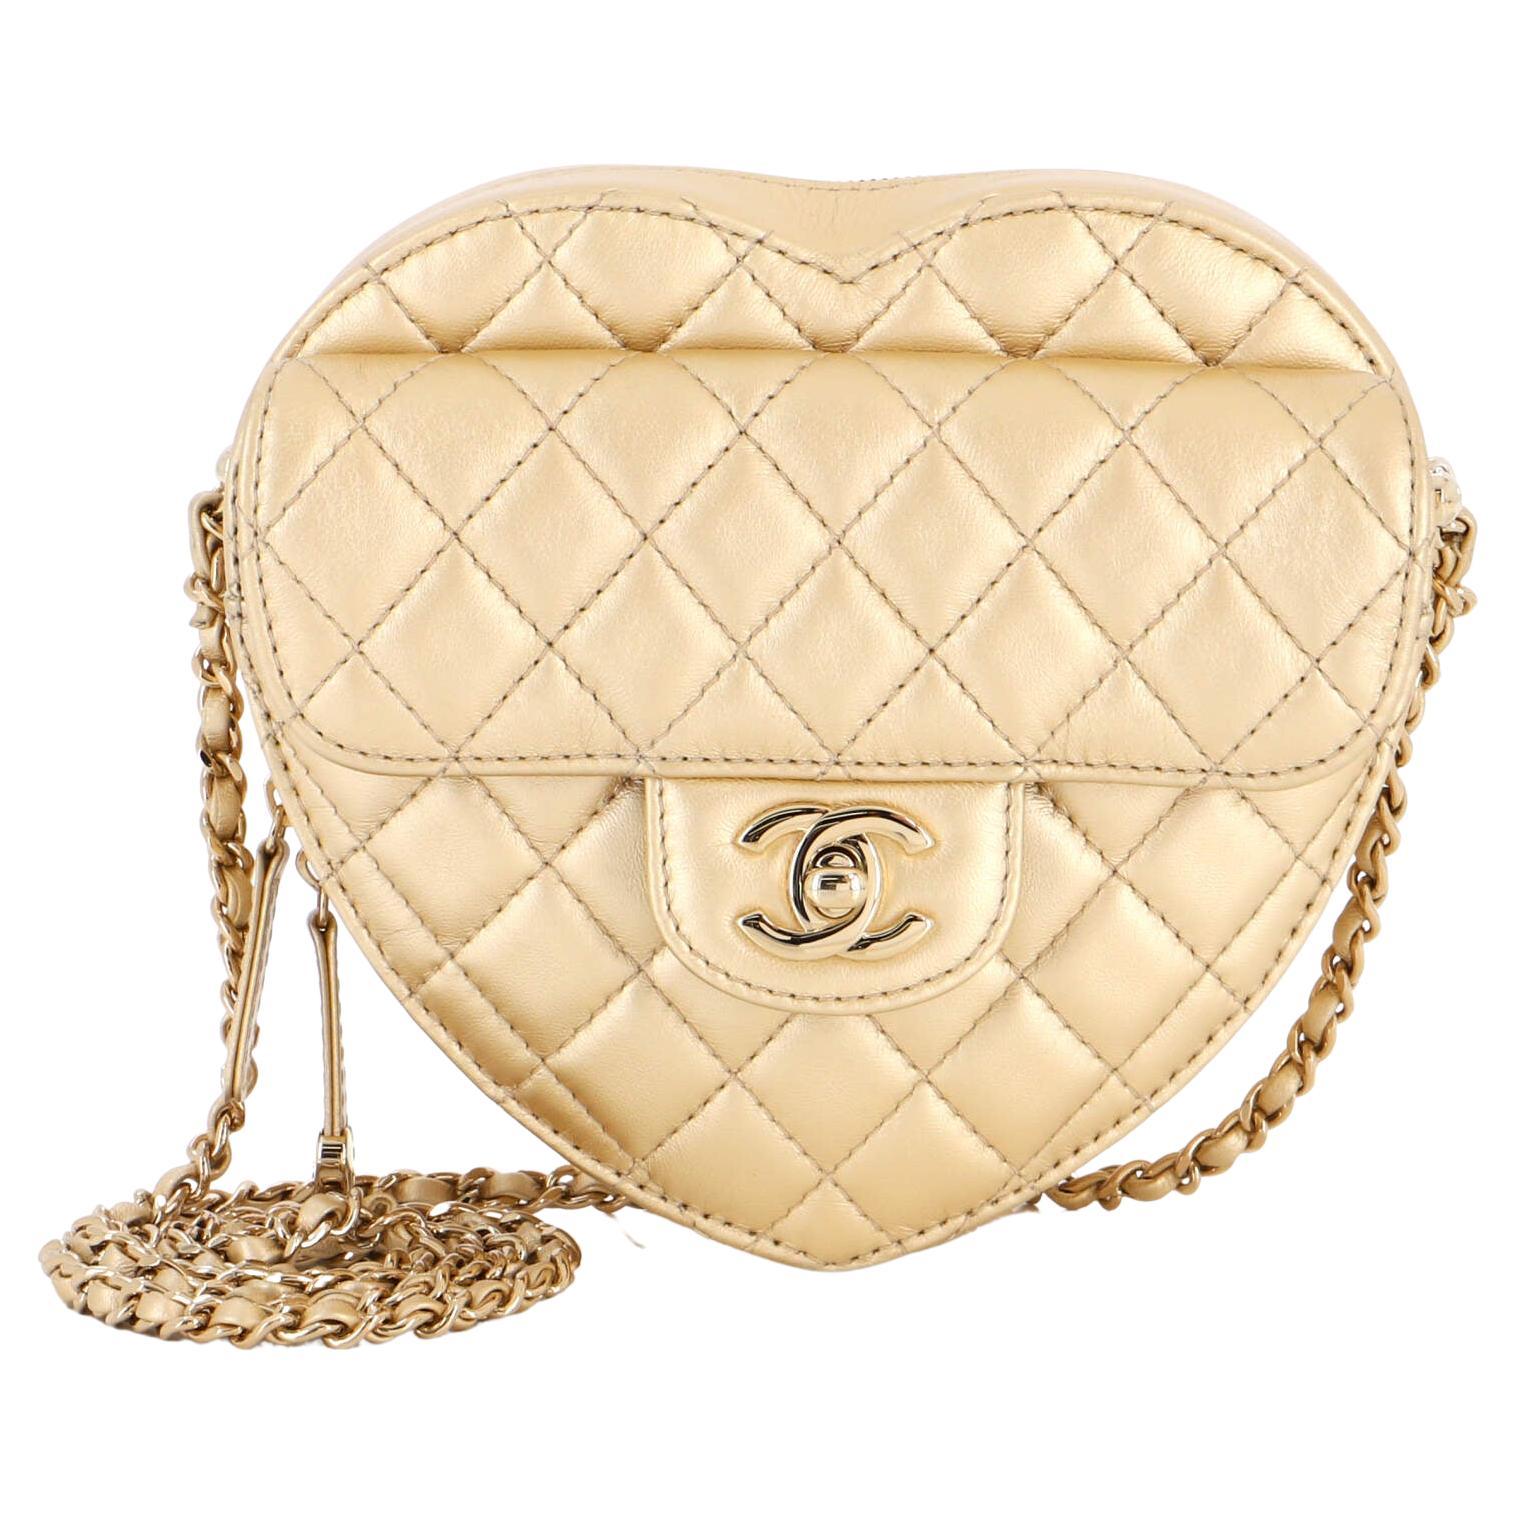 Chanel Quilted Purple Satin Mini Classic Flap GHW 33ca624s at 1stDibs   purple satin chanel bag, chanel purple satin bag, chanel classic flap